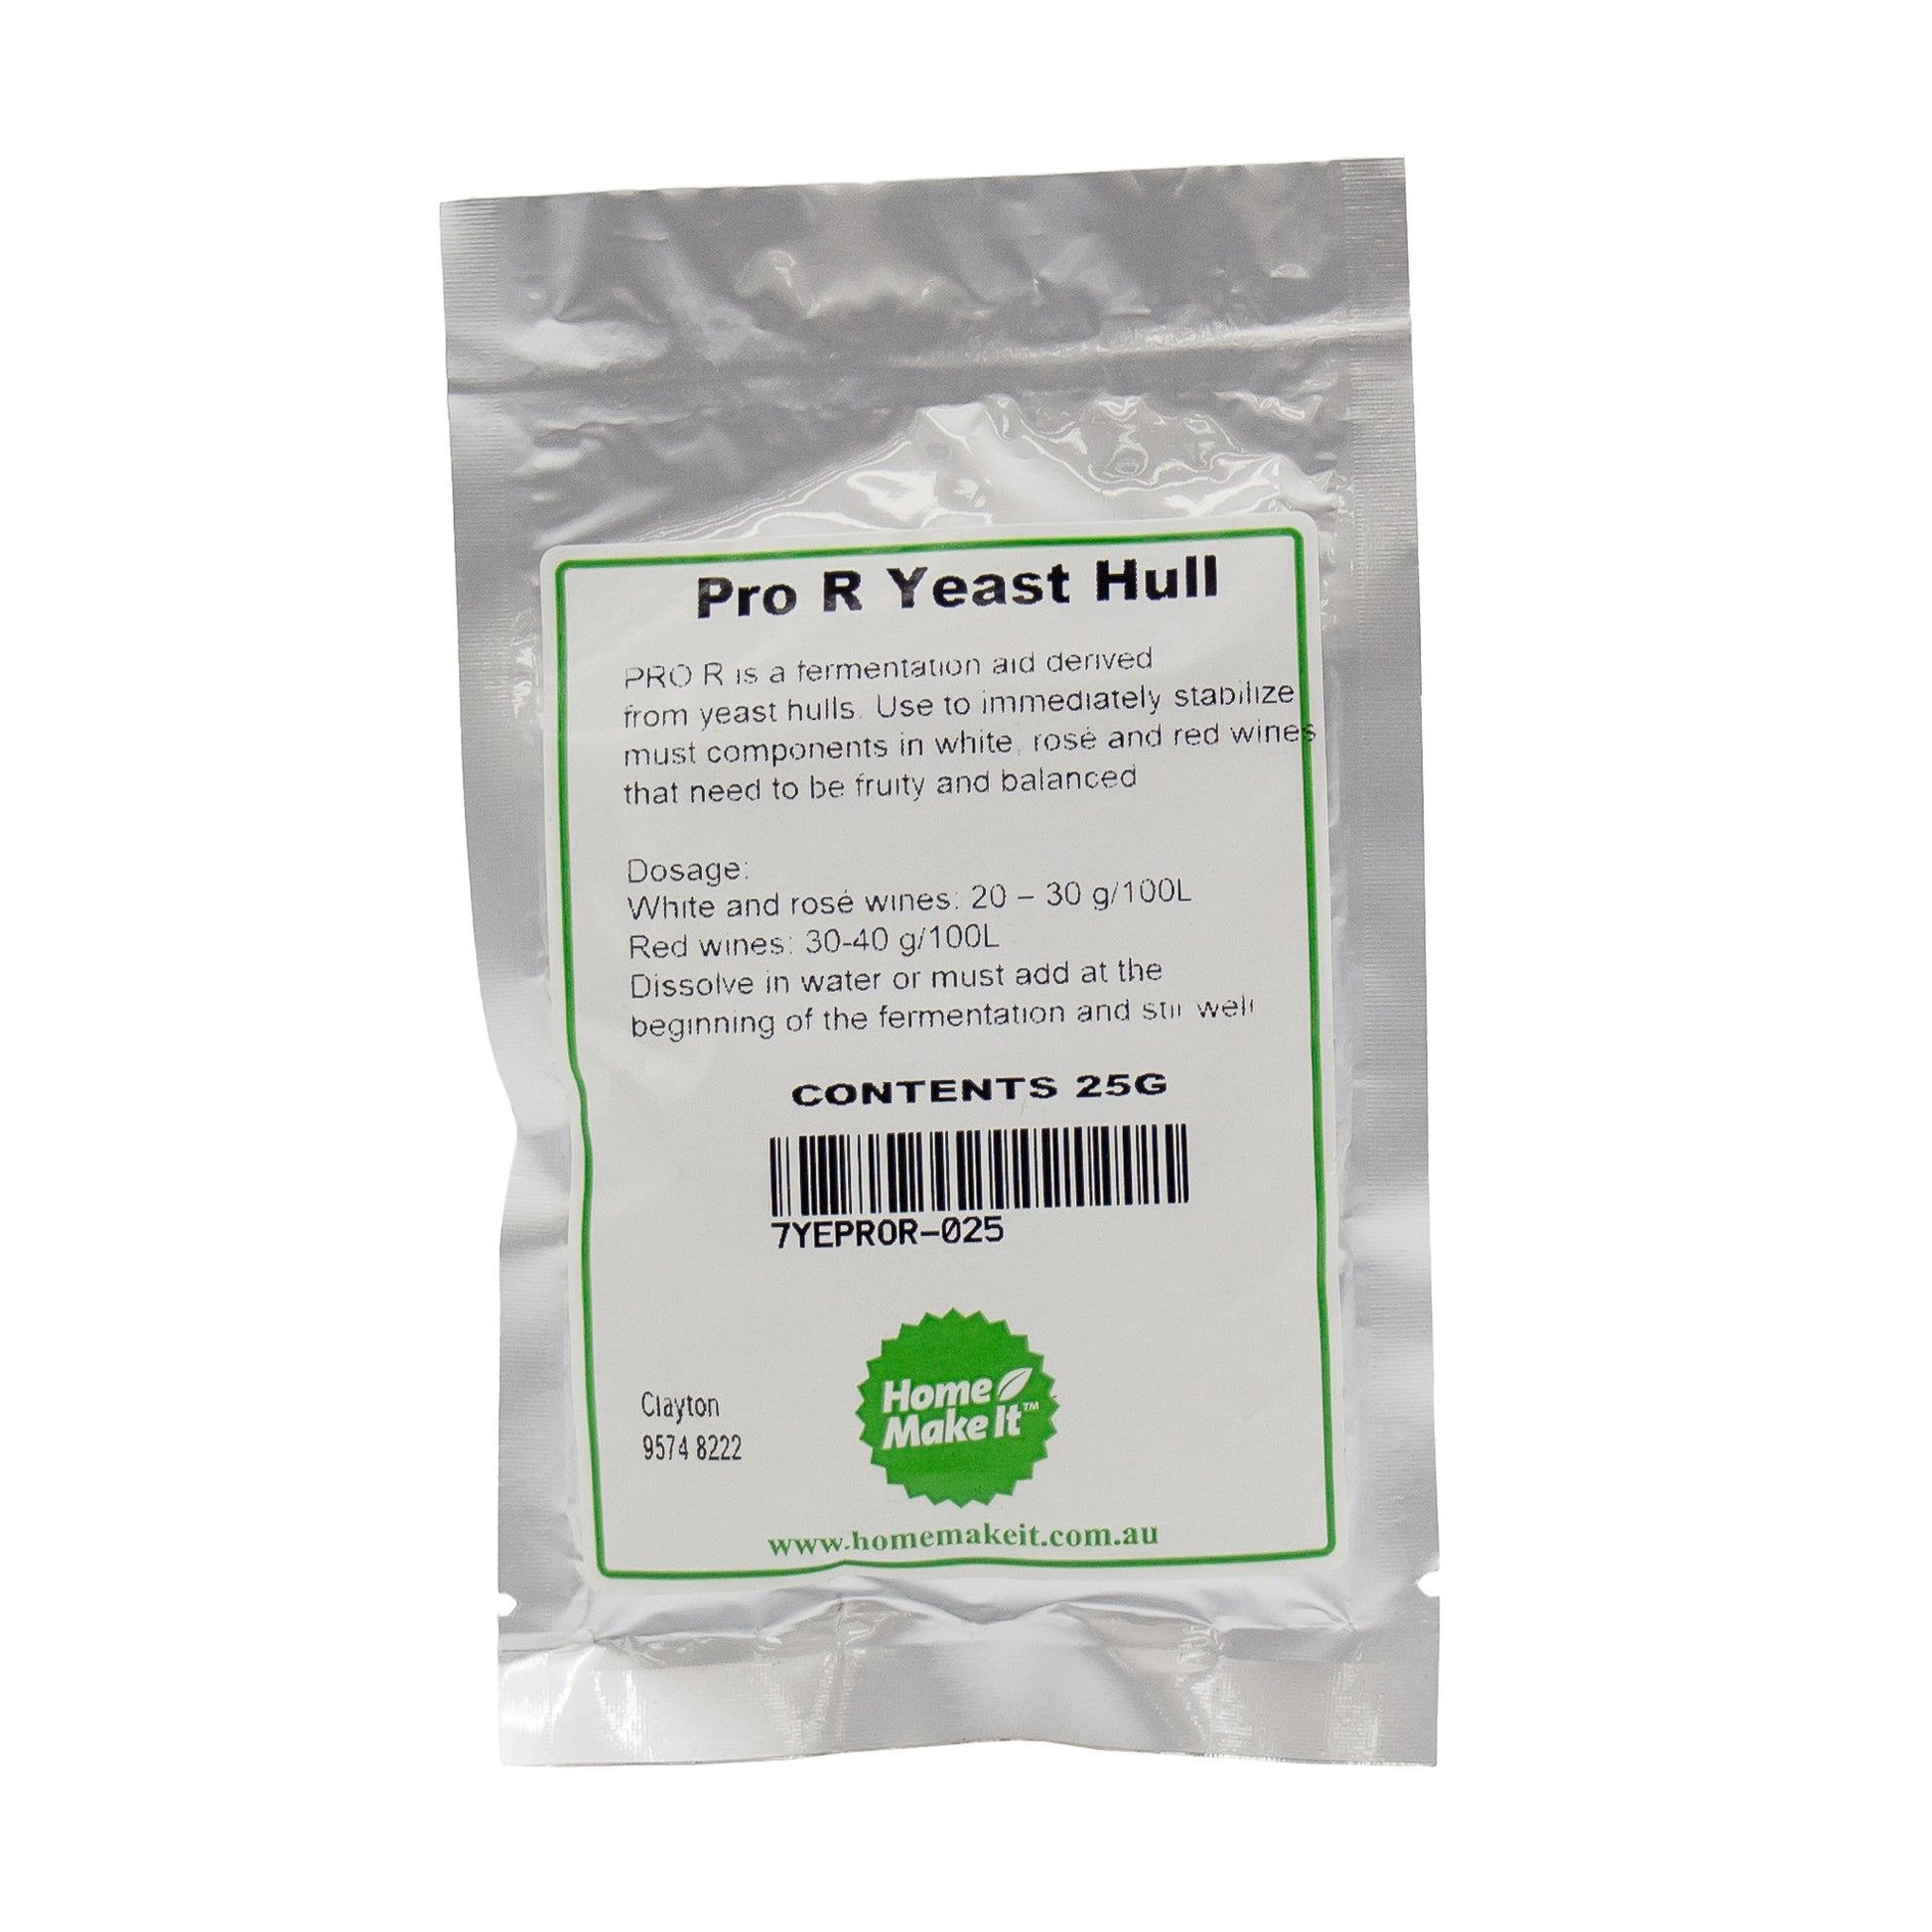 25g packet of enartis pro R yeast hull used in wine making